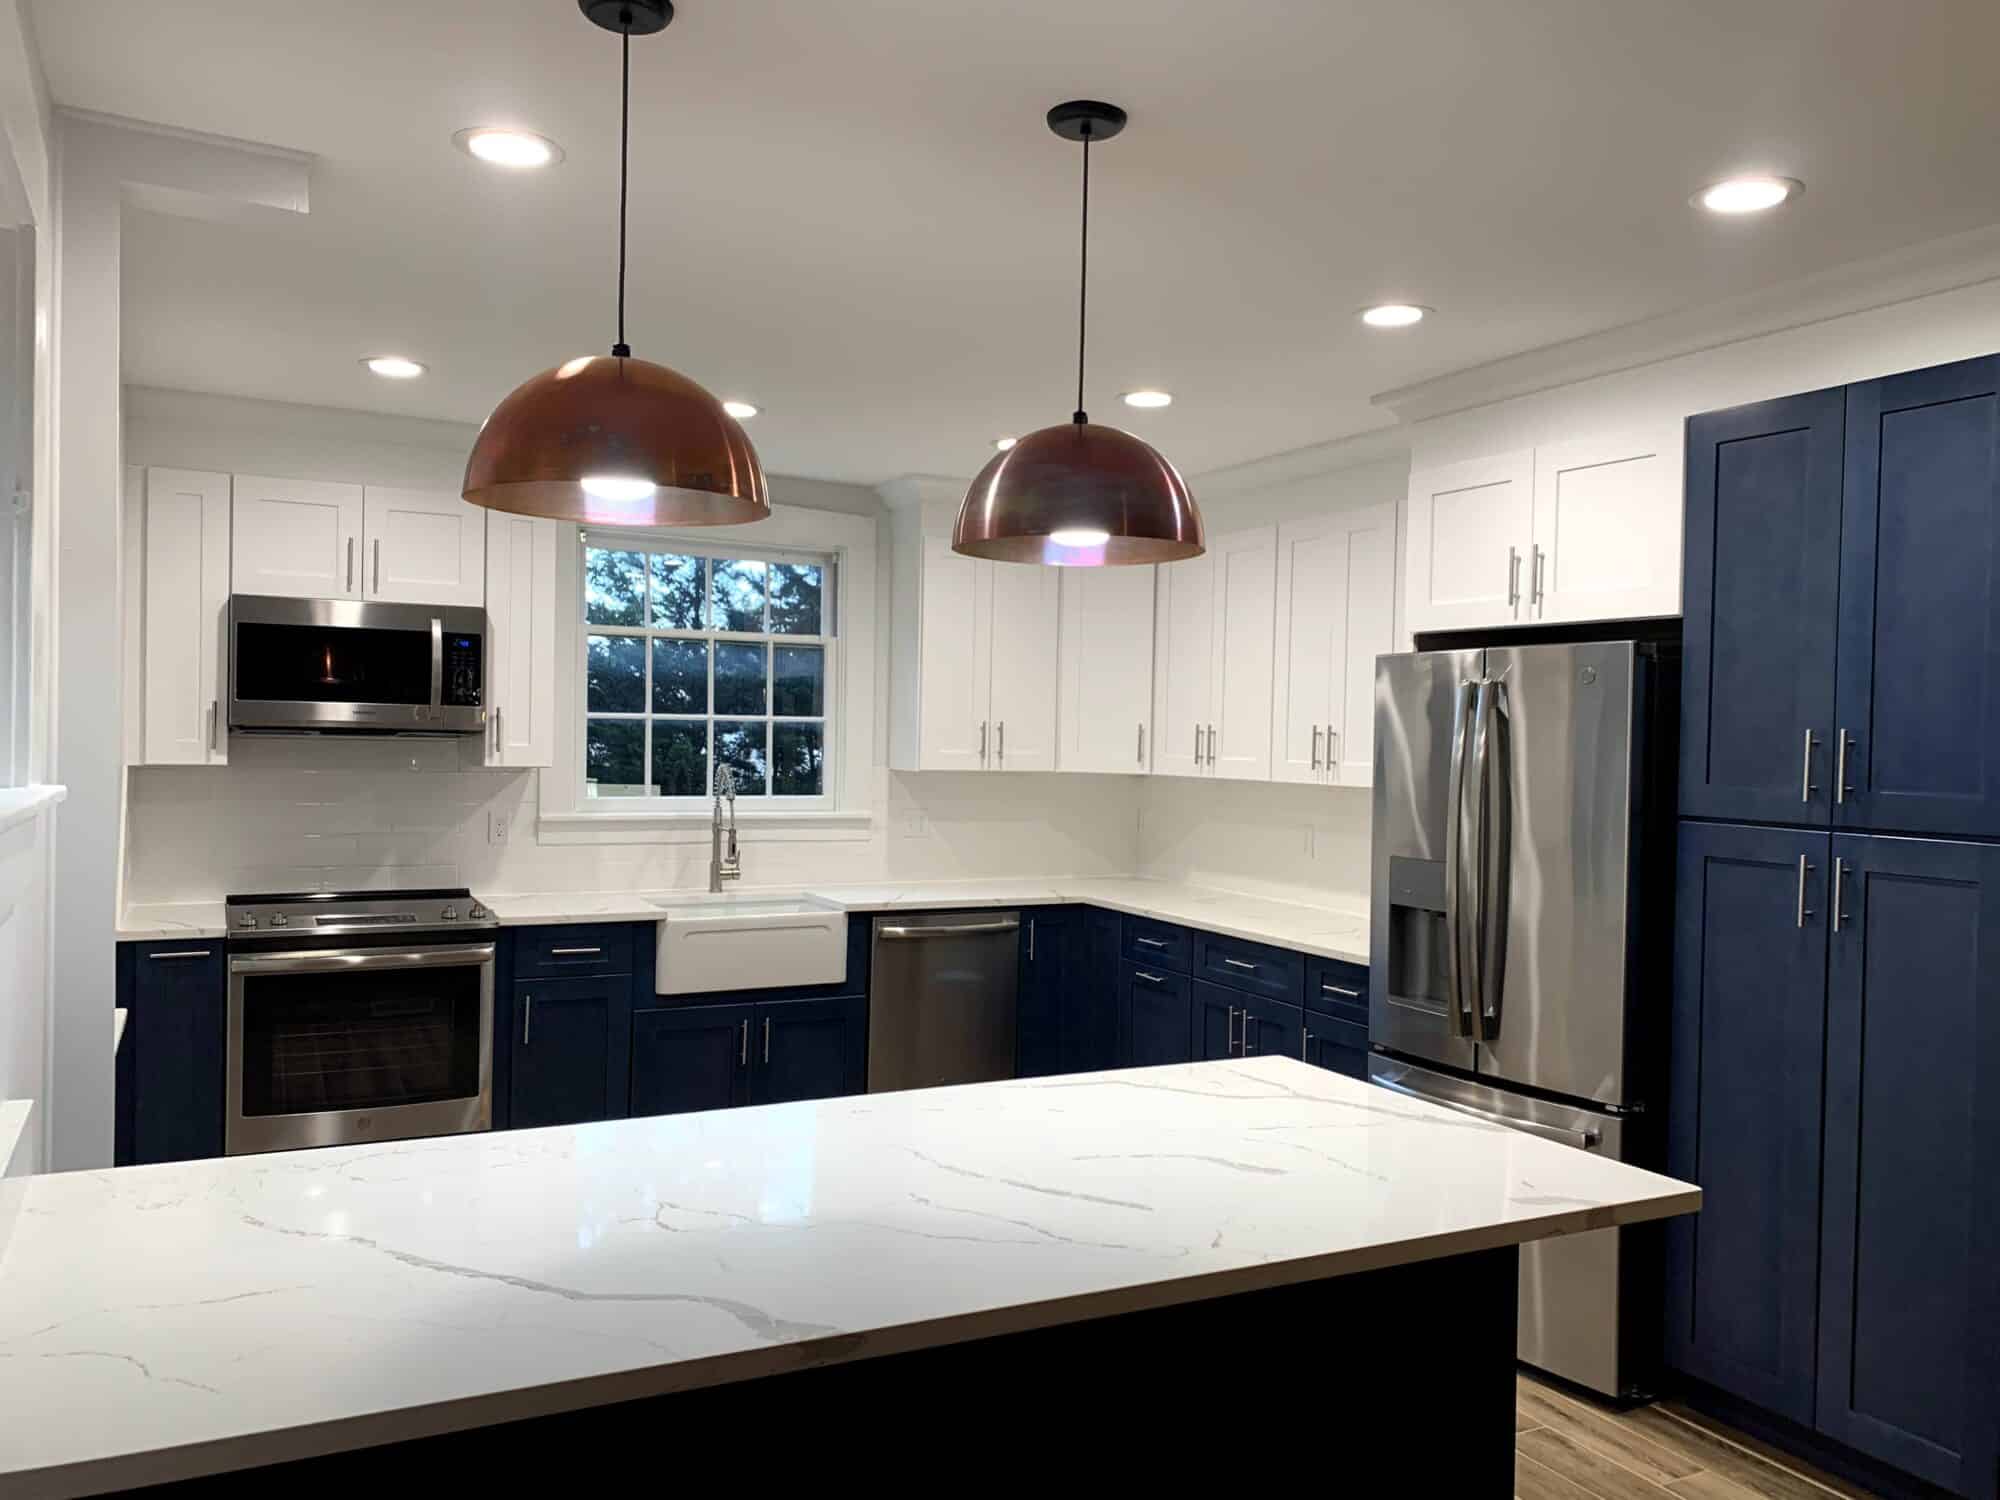 TradeMark Construction offers a variety of home remodeling services. These include remodeling for kitchens, bathrooms, and basements. They also handle other home improvement projects and provide general contracting services. Each project is tailored to meet the specific needs and preferences of their clients, ensuring a personalized and high-quality outcome.